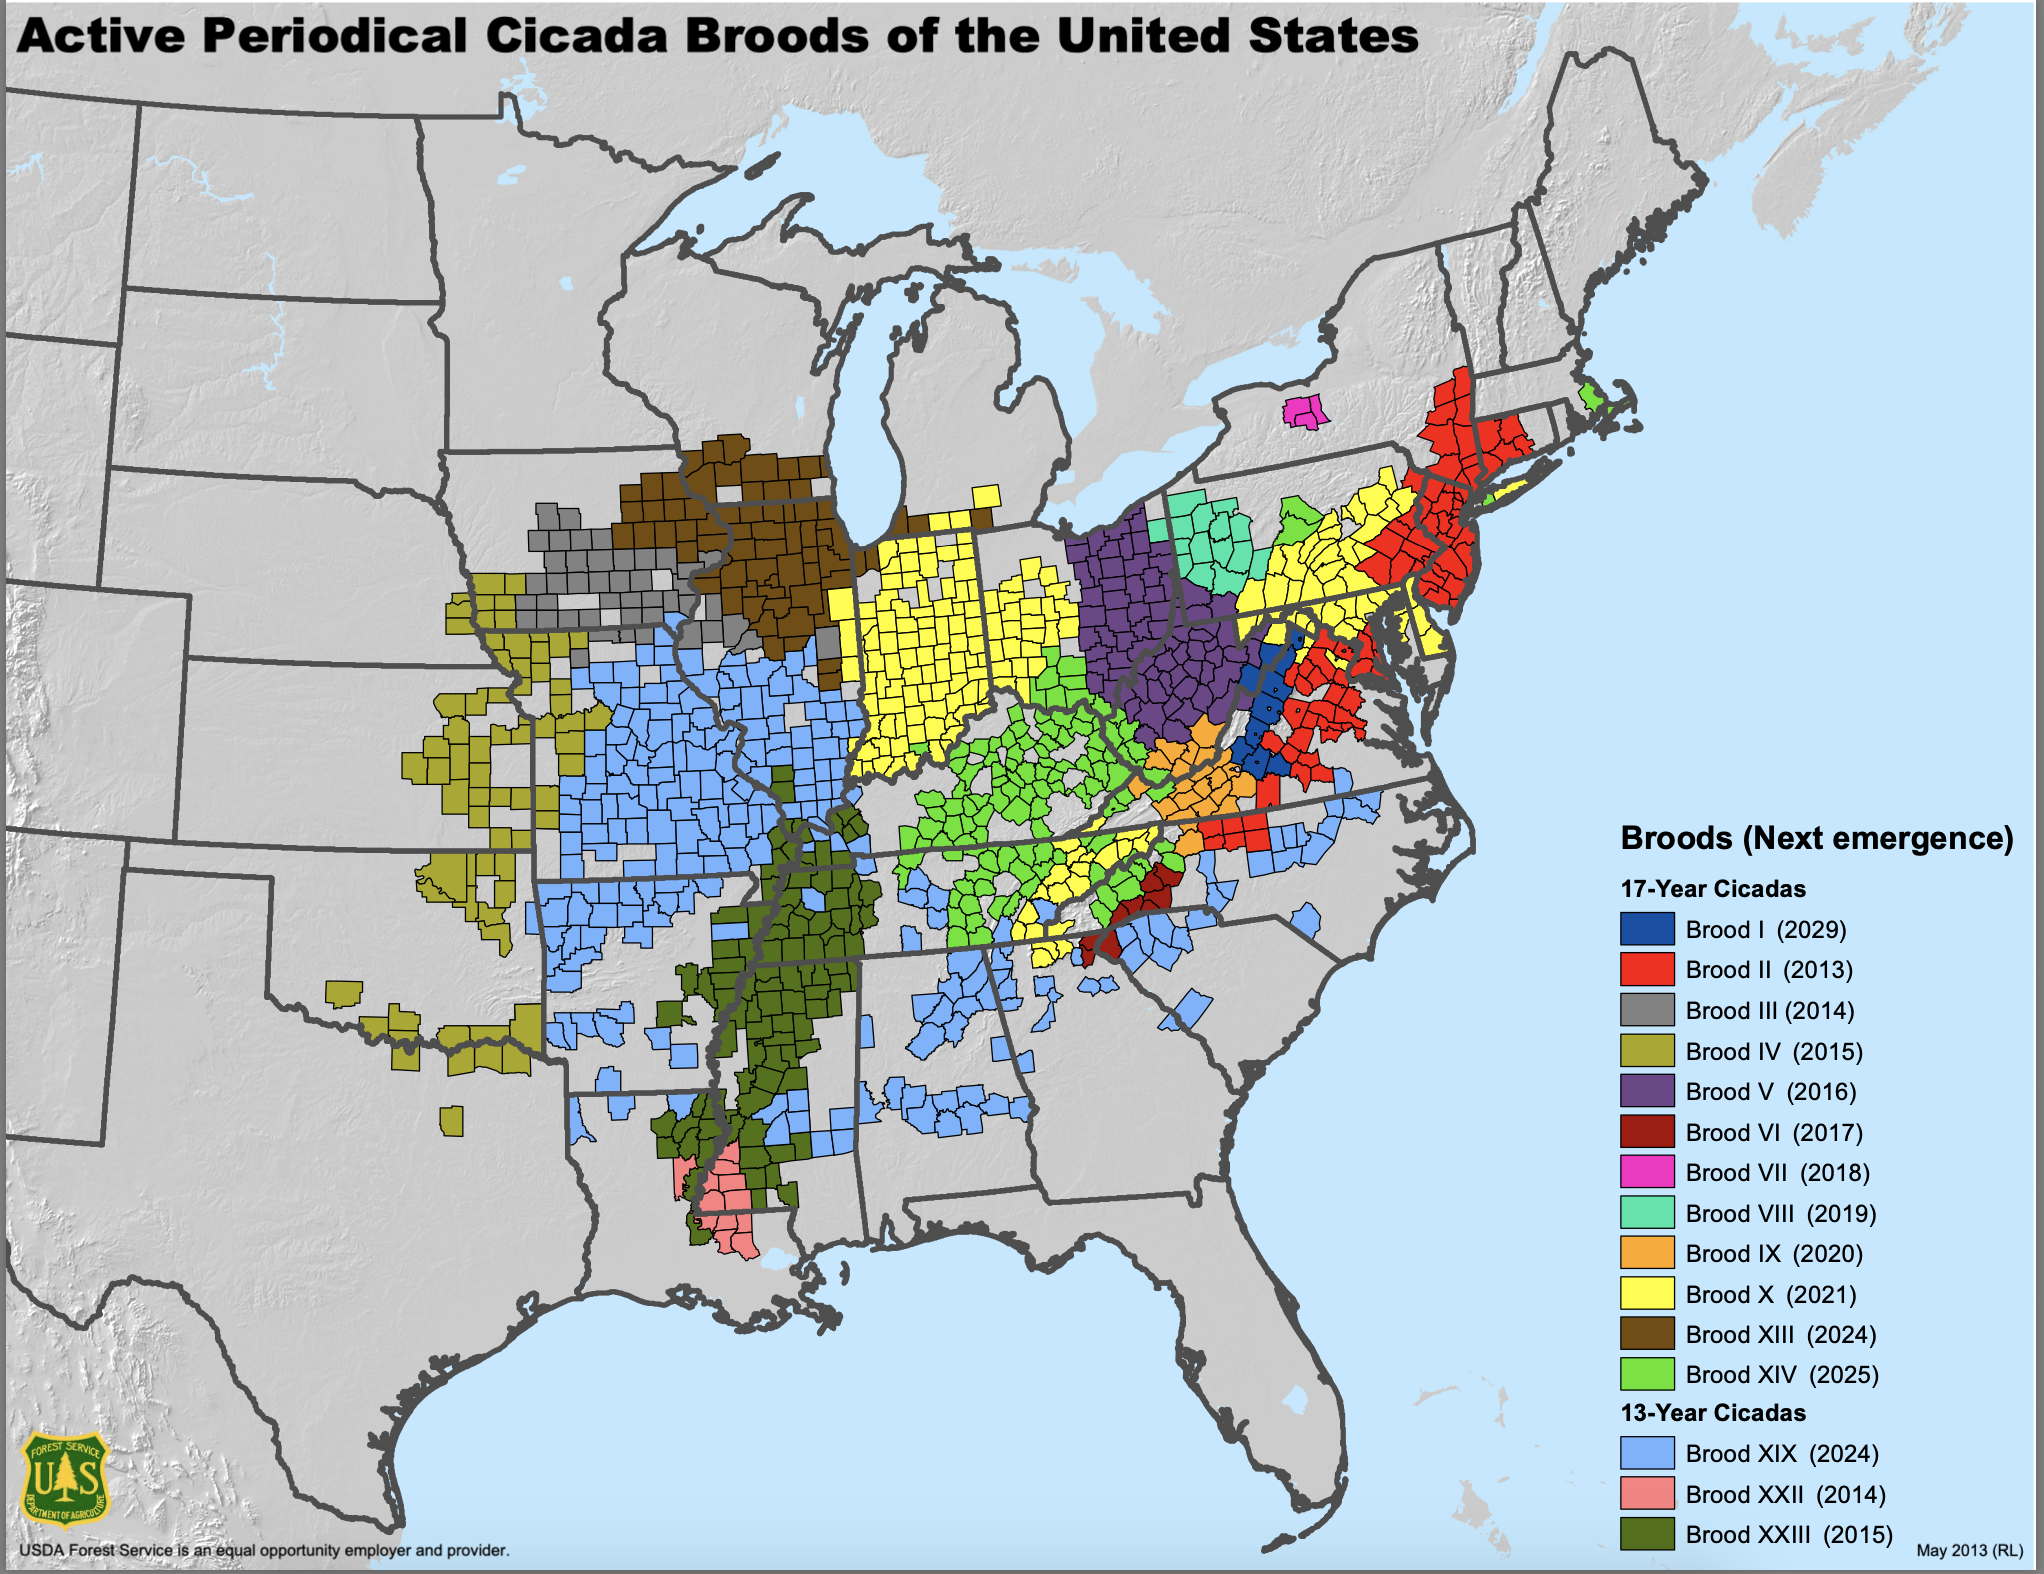 Active broods expected to emerge across the US. Credit: United States Forest Service 